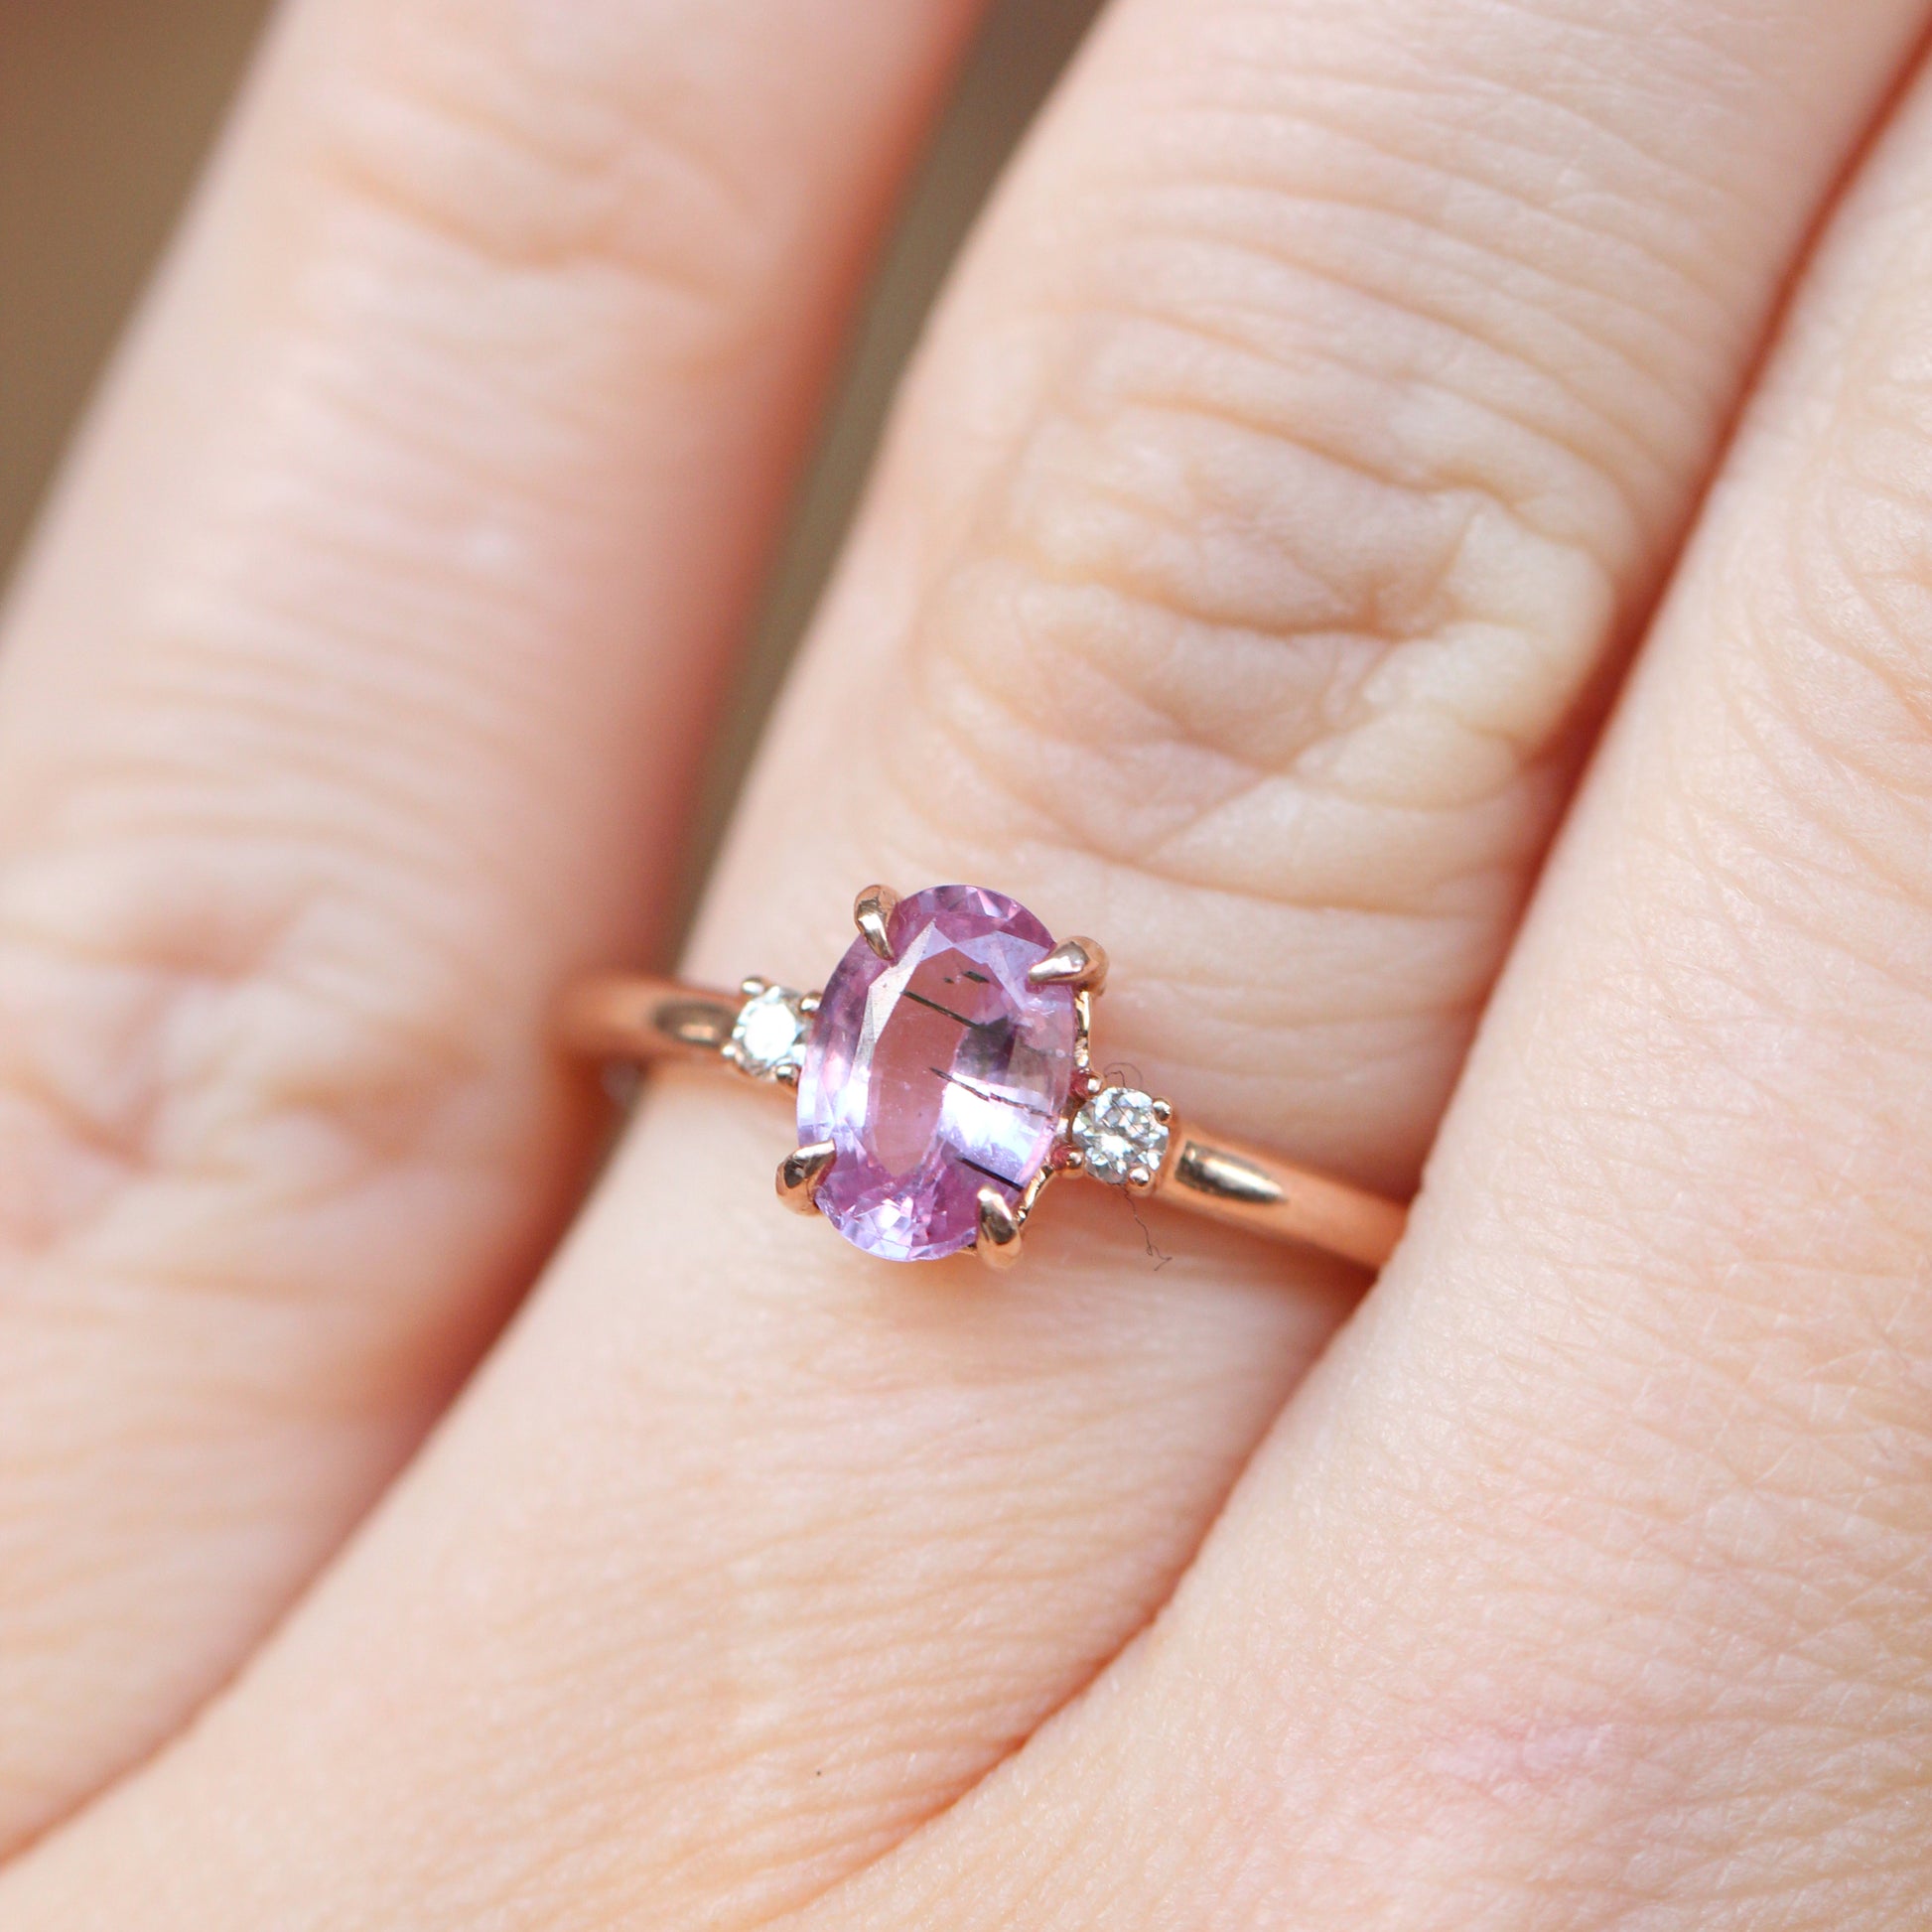 Terra Ring with 1.05 carat pink sapphire with black needle inclusions and white diamonds in 10k rose gold - ready to size and ship - Midwinter Co. Alternative Bridal Rings and Modern Fine Jewelry